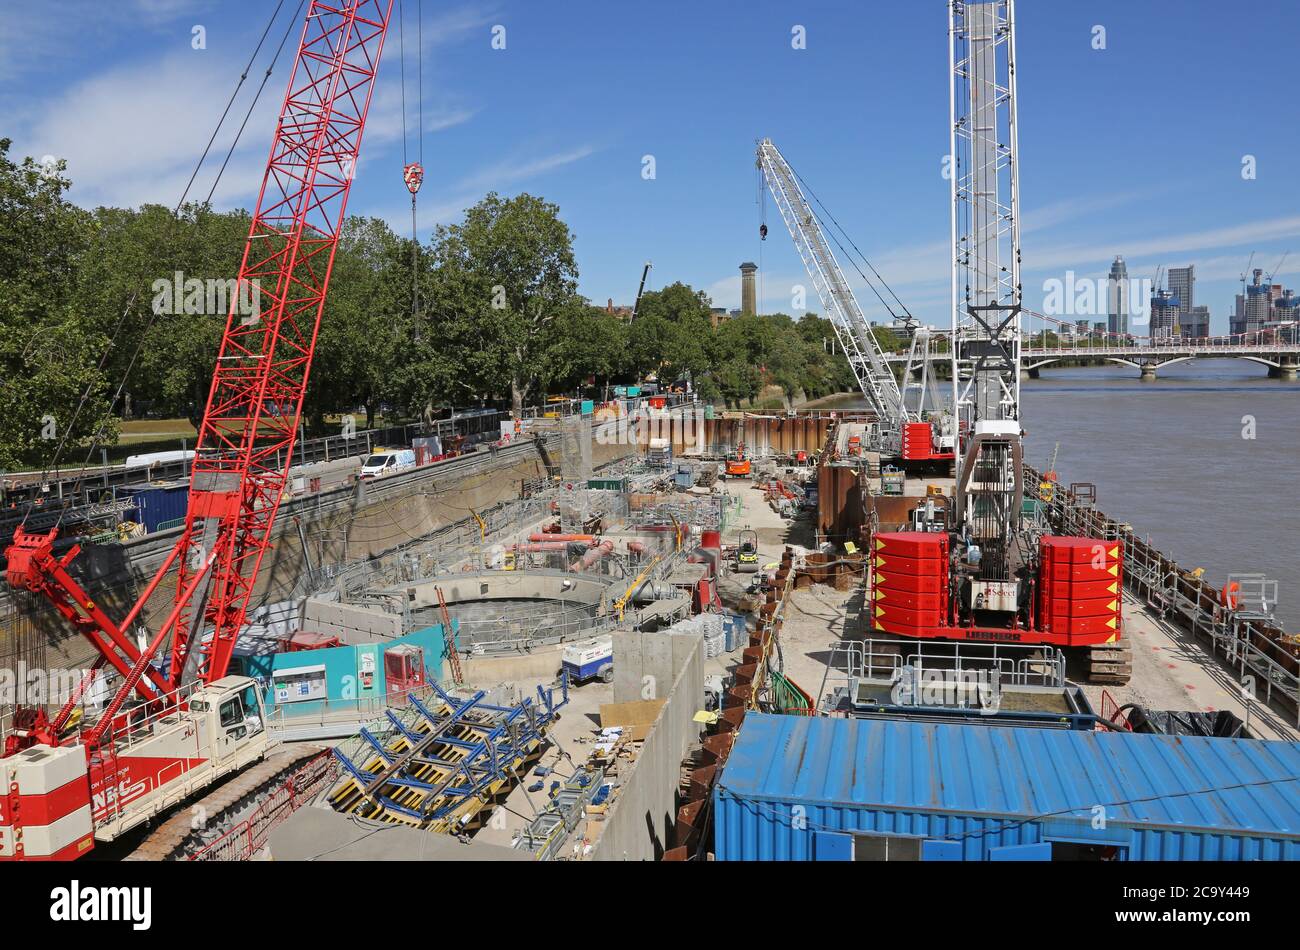 The Thames Tideway sewer construction site at Chelsea Embankment, London. Shows the steel cofferdam and concrete shafts to the main tunnel 50m below. Stock Photo